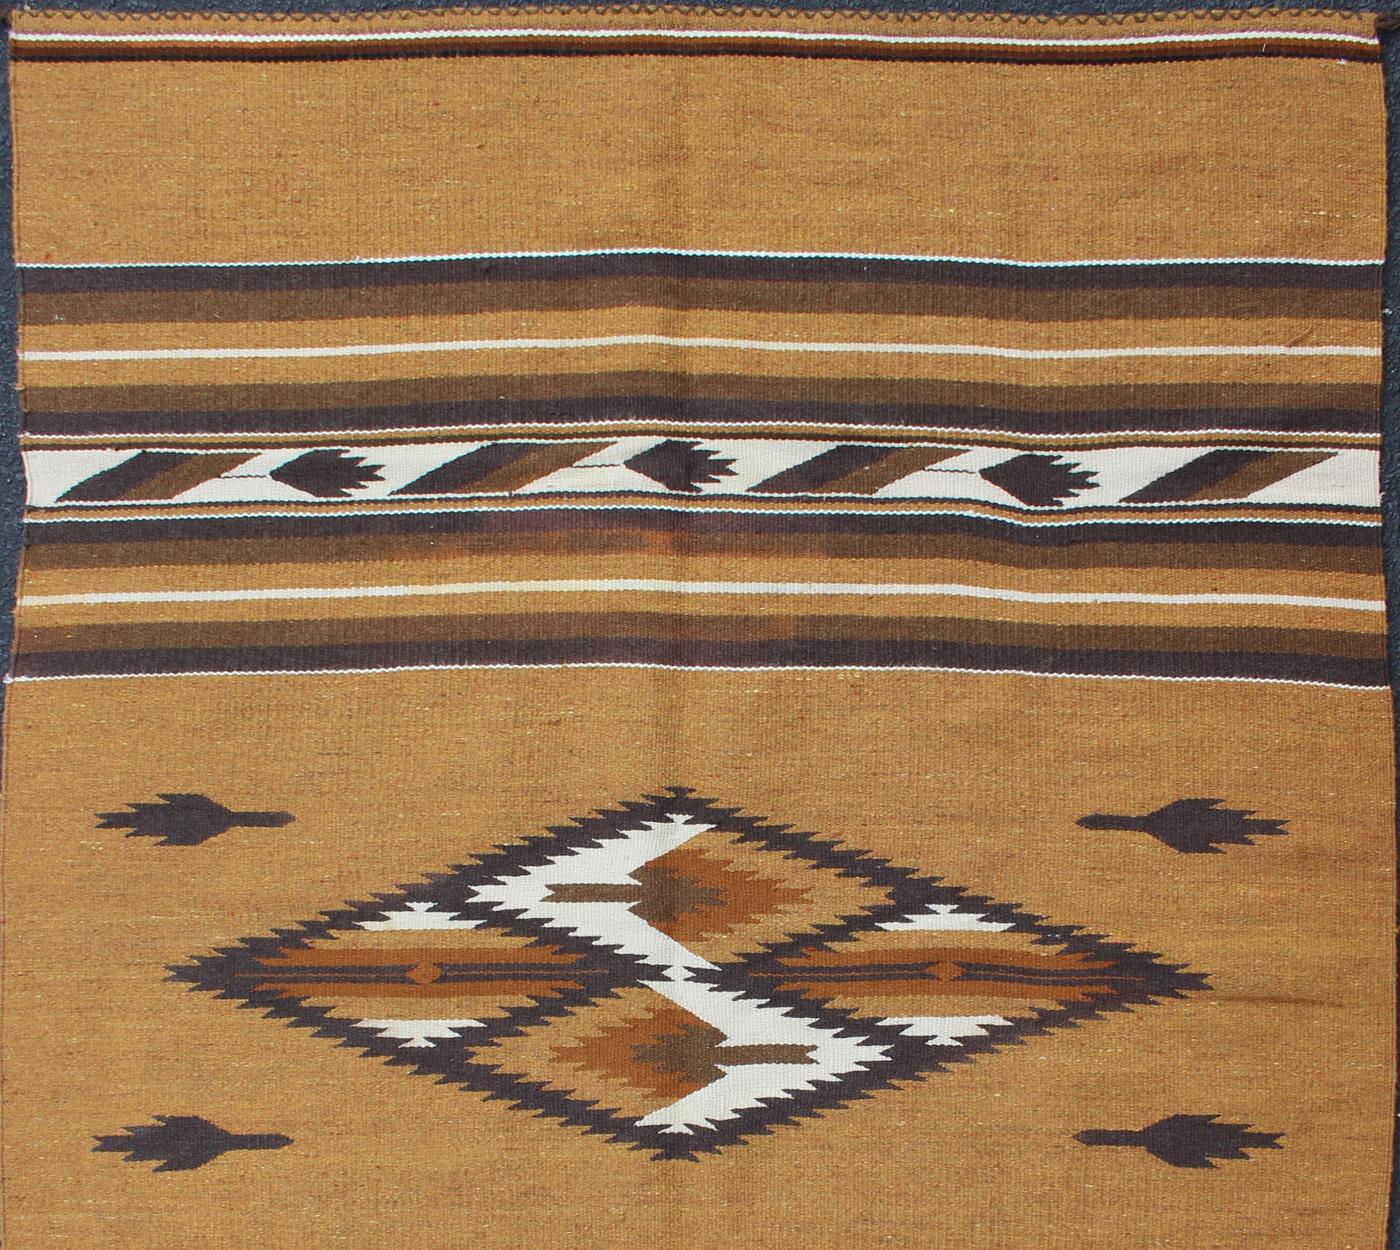 1930s American Navajo Kilim with geometric design in Marigold, brown, and ivory rug 1912-1511, country of origin / type: America / Navajo, circa 1930

This intriguing antique Navajo Kilim, circa 1930 was woven in the United States during the first